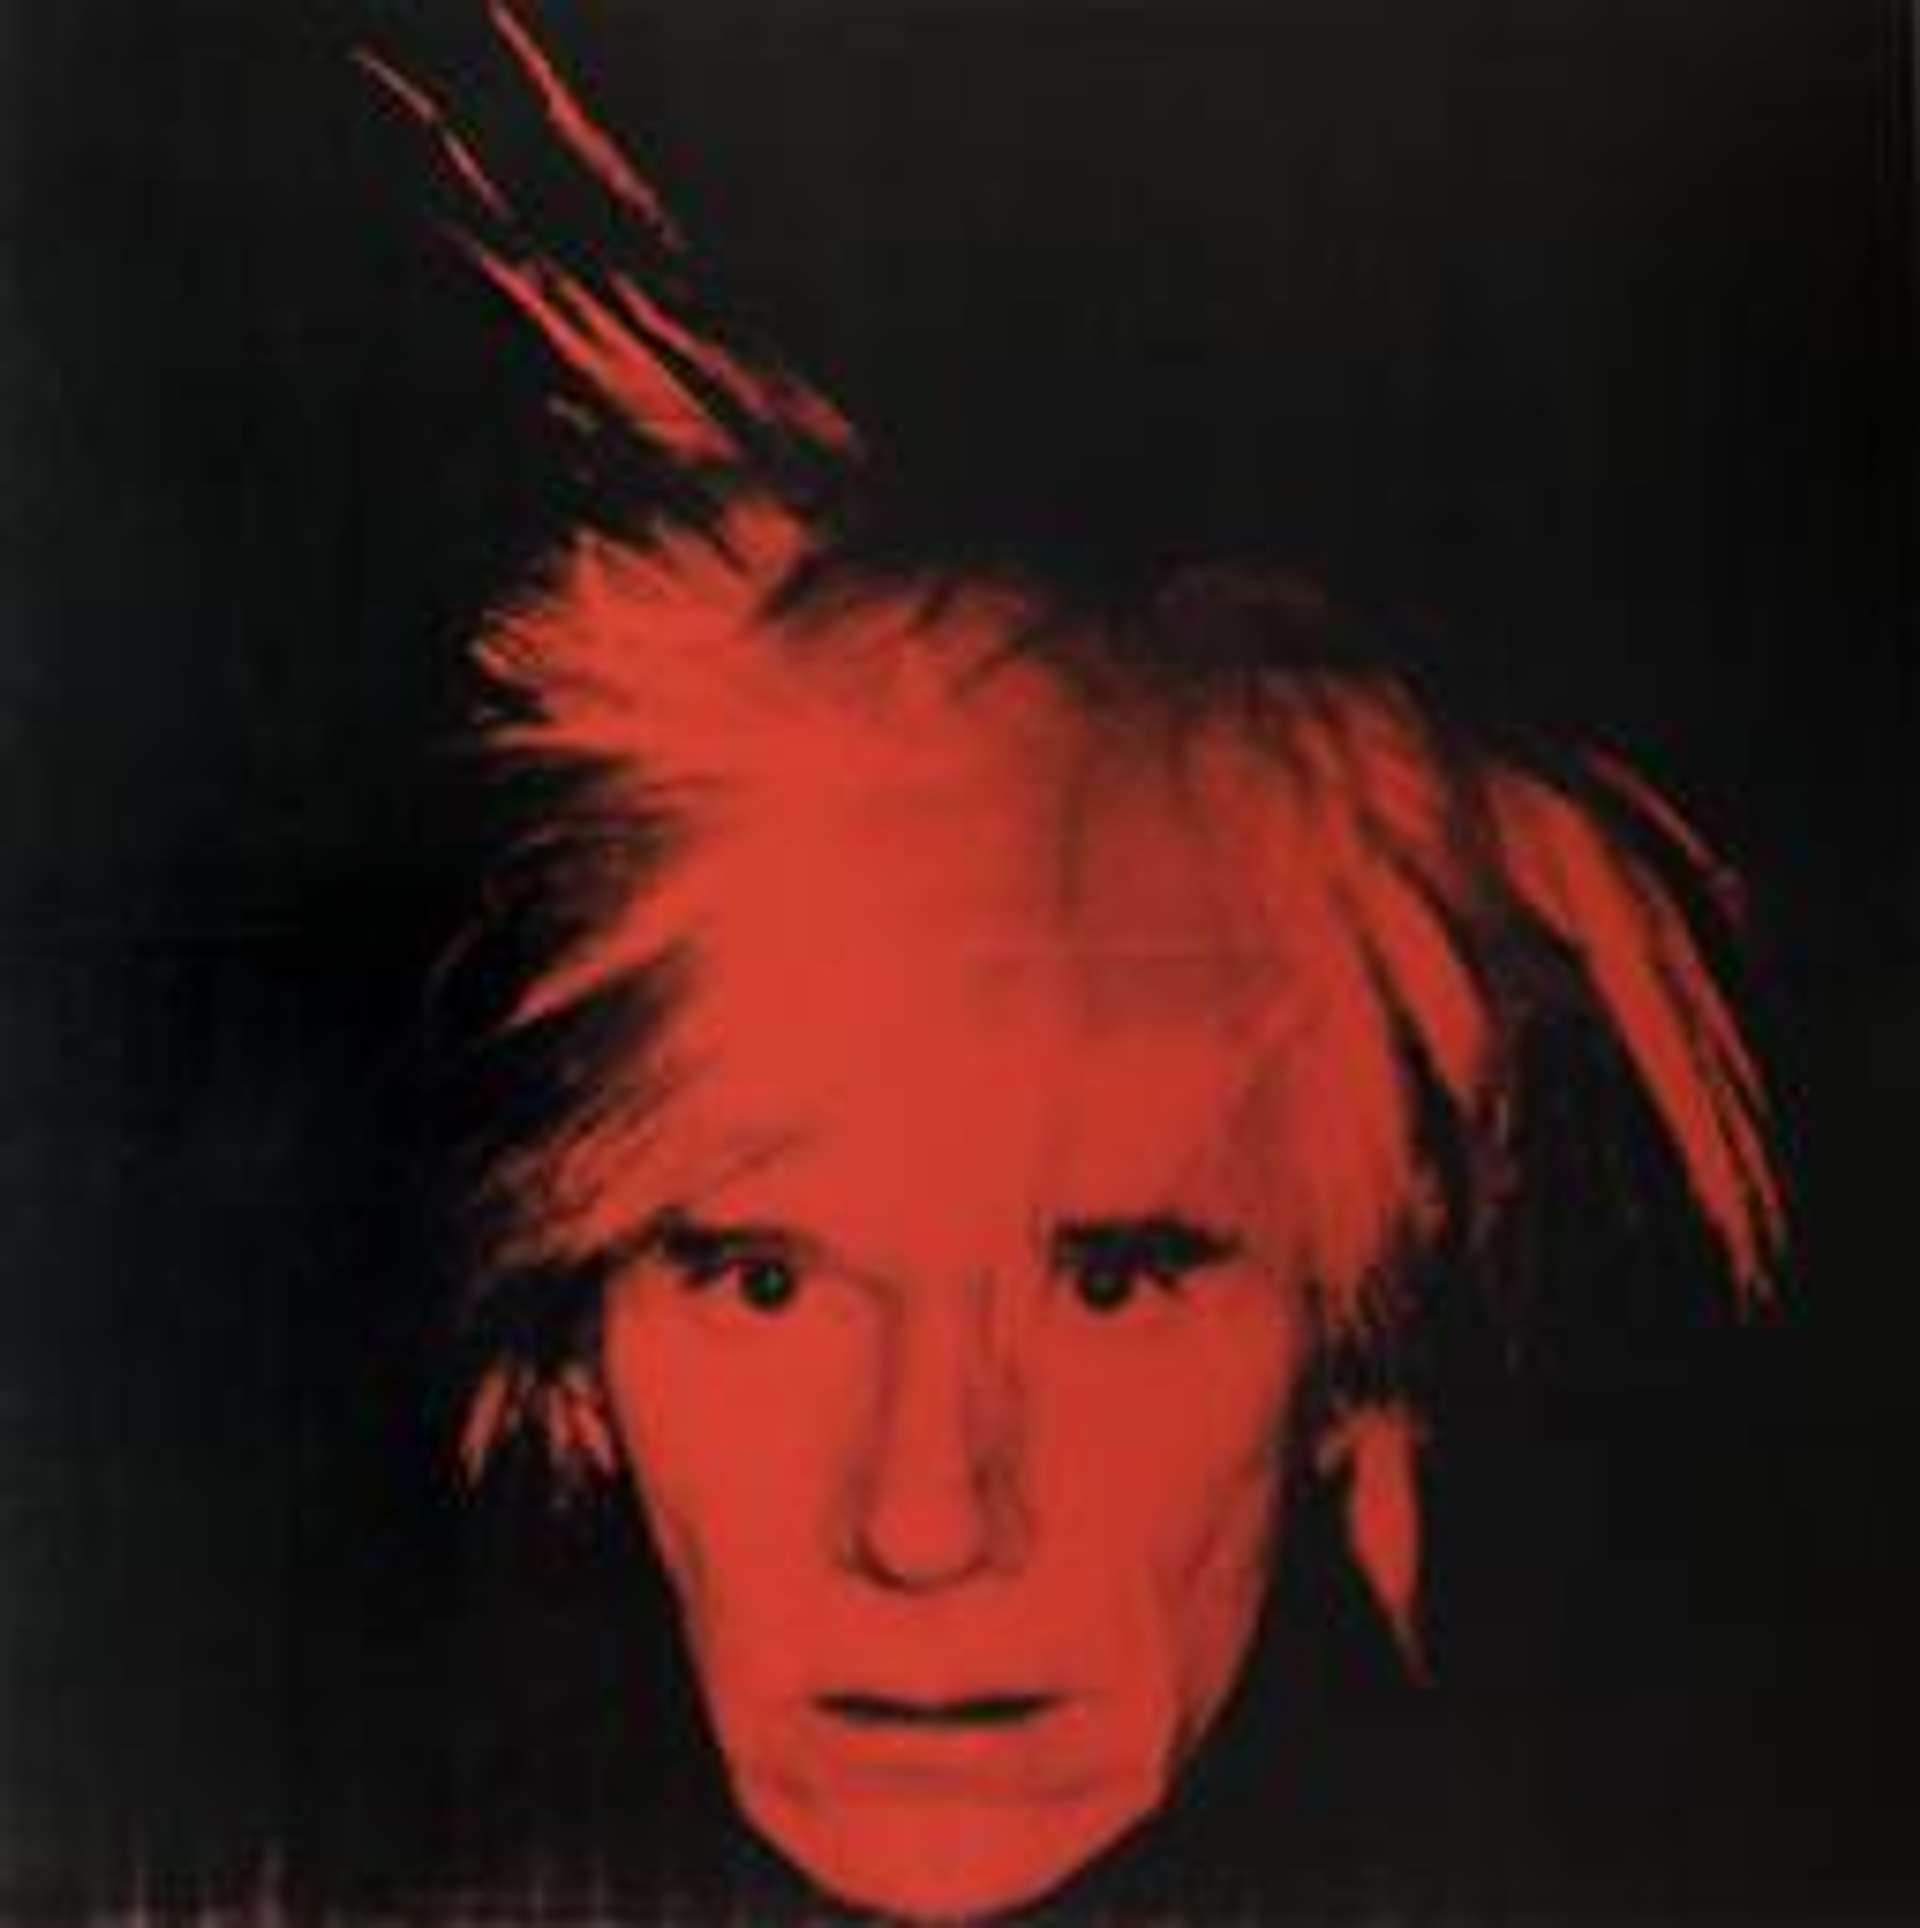 A close-up screenprinted image of Andy Warhol's face, gazing directly at the camera, overlaid in red on a black canvas.